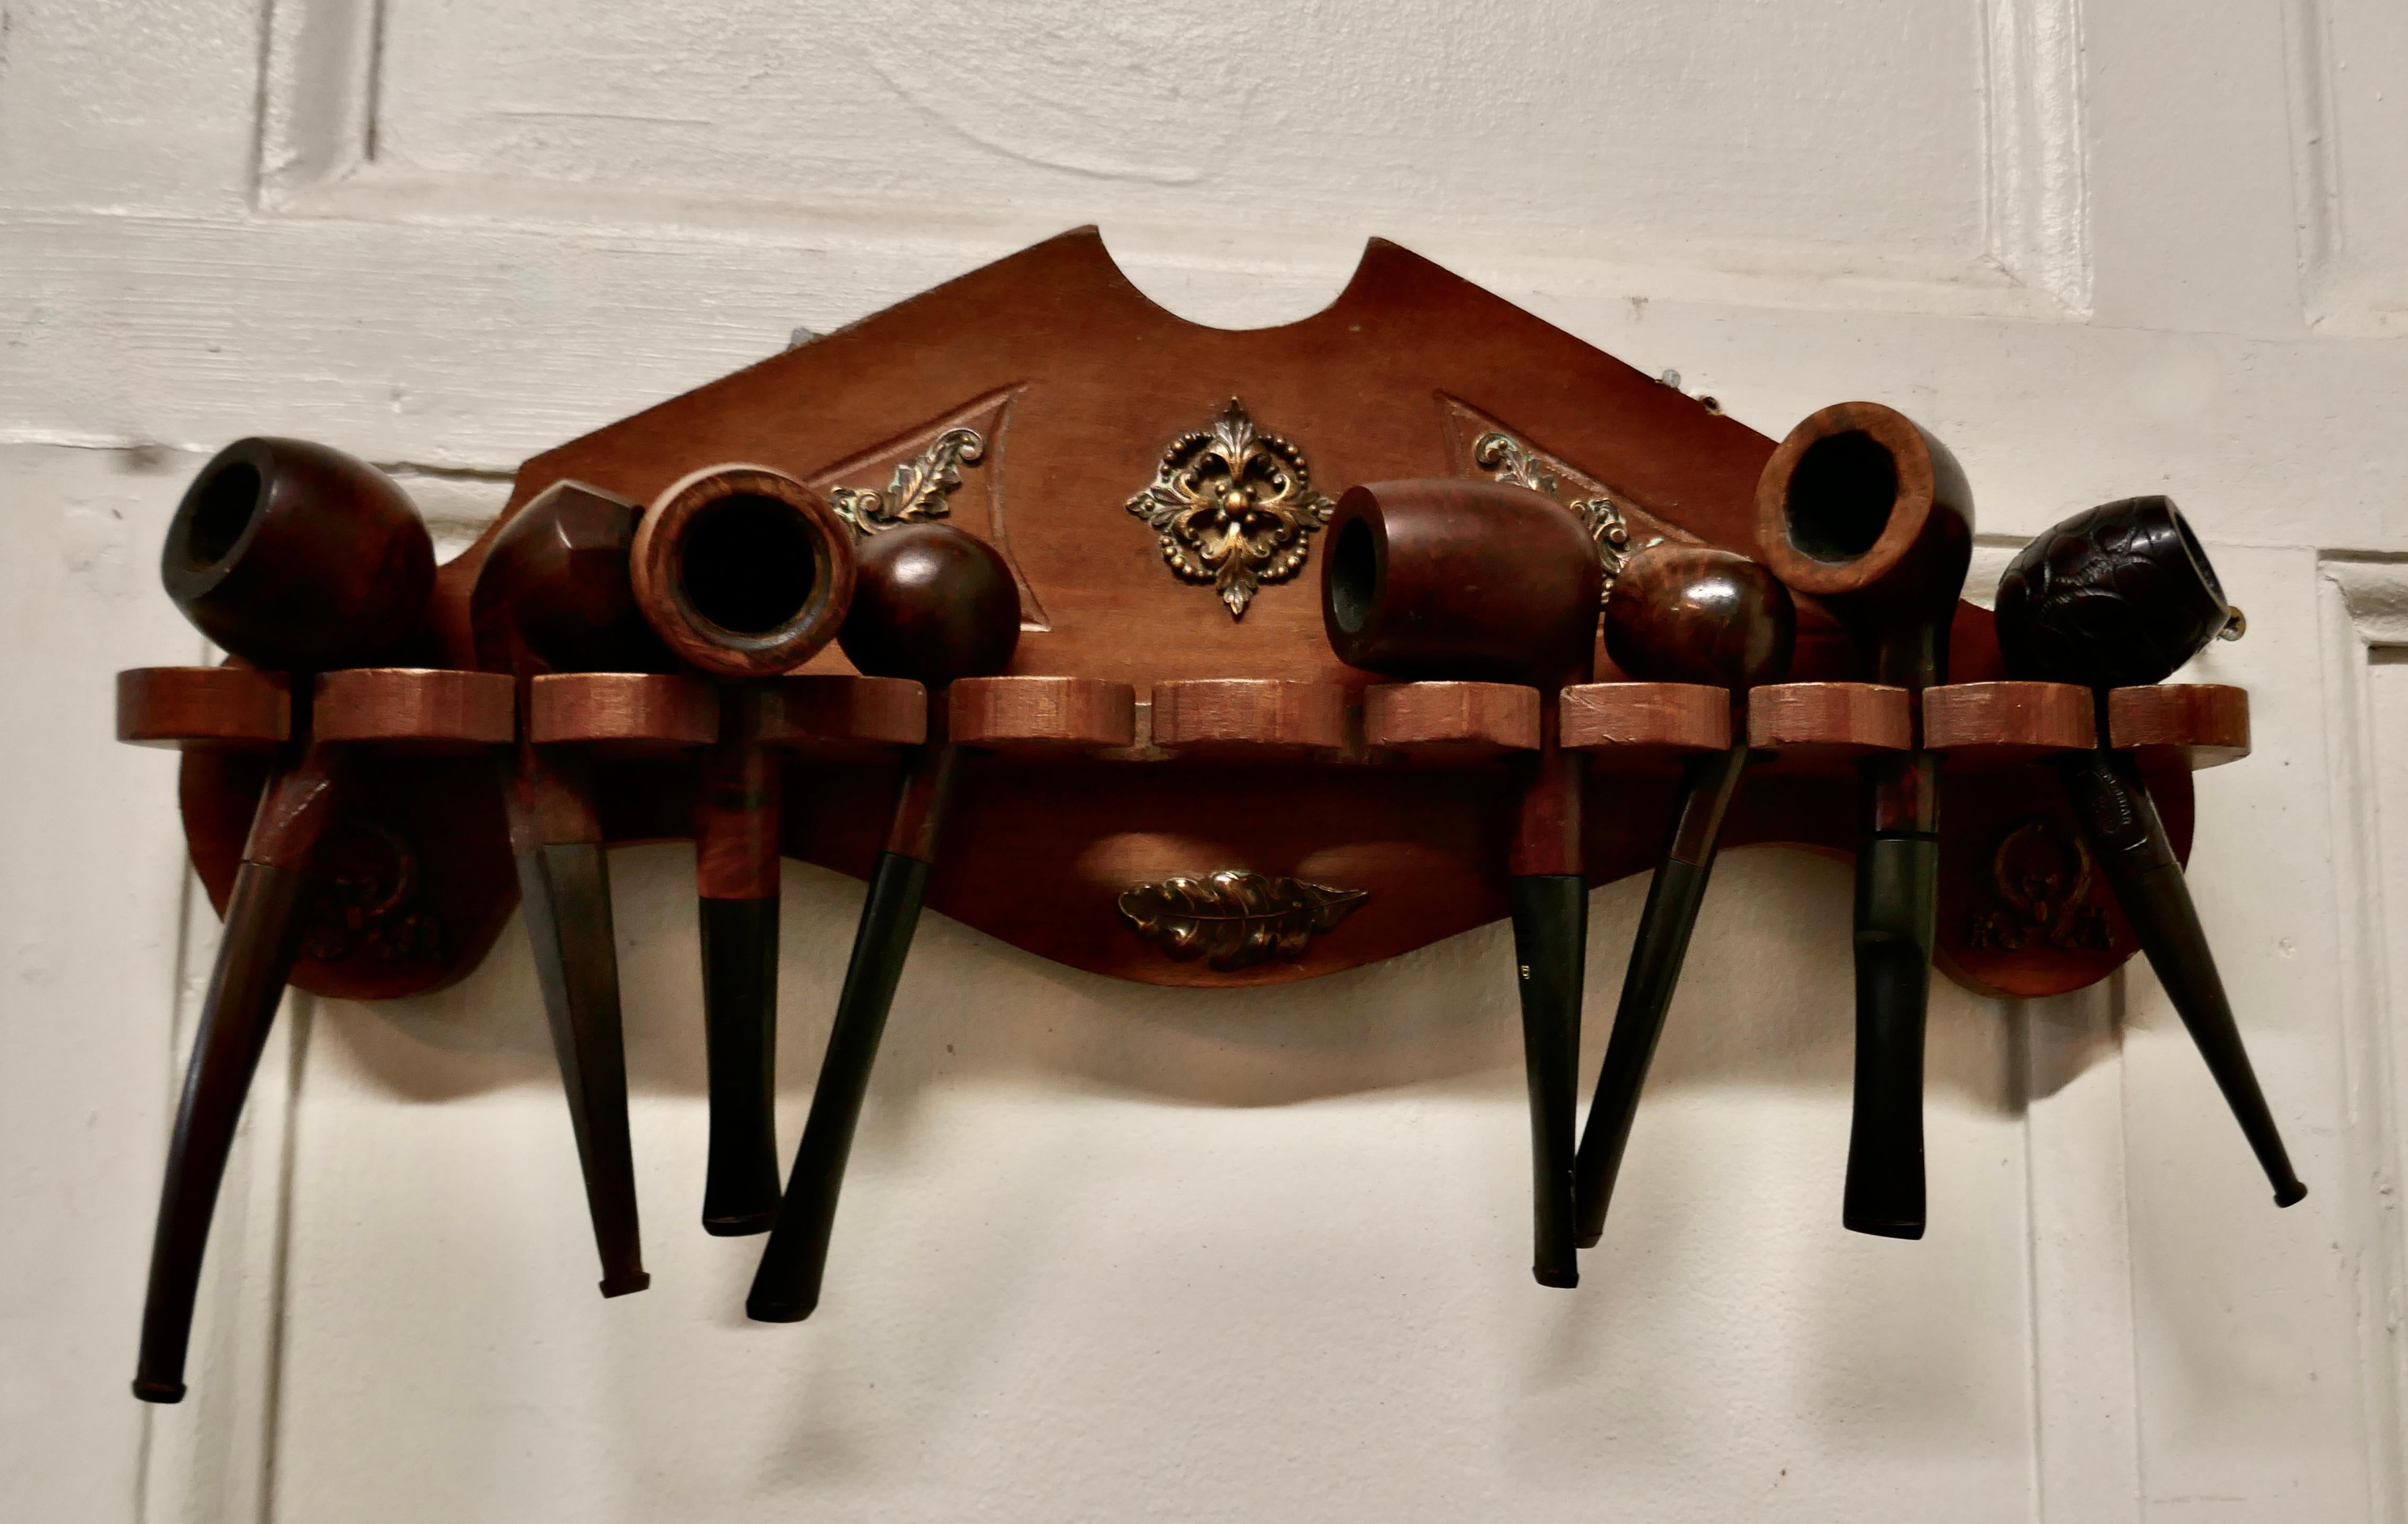 A Collection of 12 Vintage Tobacco pipes in a pipe rack

A good representative collection of used brier pipes, in a fruitwood wall hanging pipe rack, all in good used condition, the decoration of the pipe rack is in pressed Copper it is 10” high,